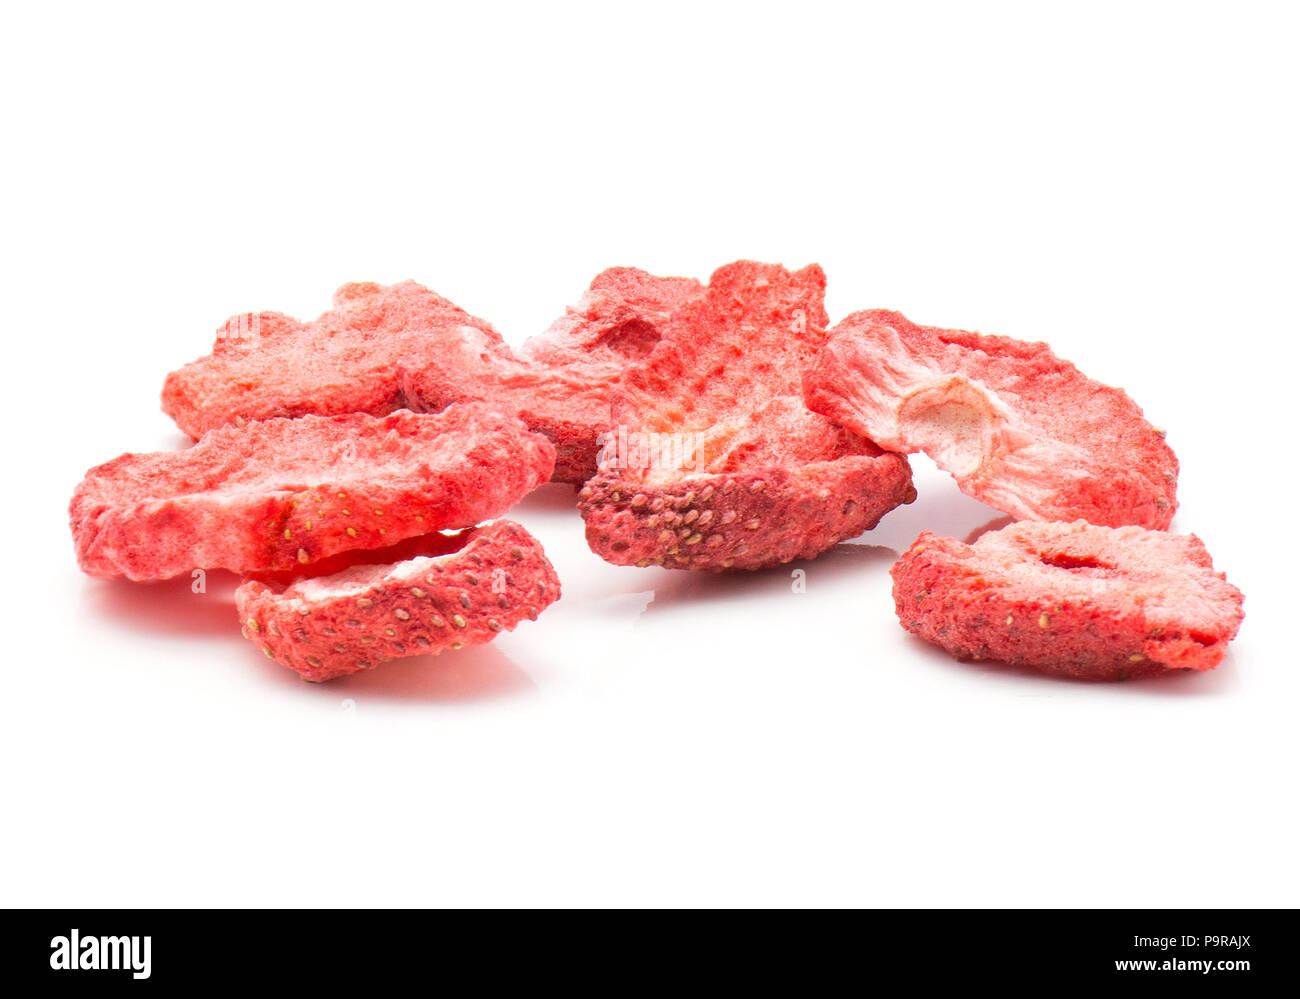 Freeze dried strawberries stack isolated on white background Stock Photo